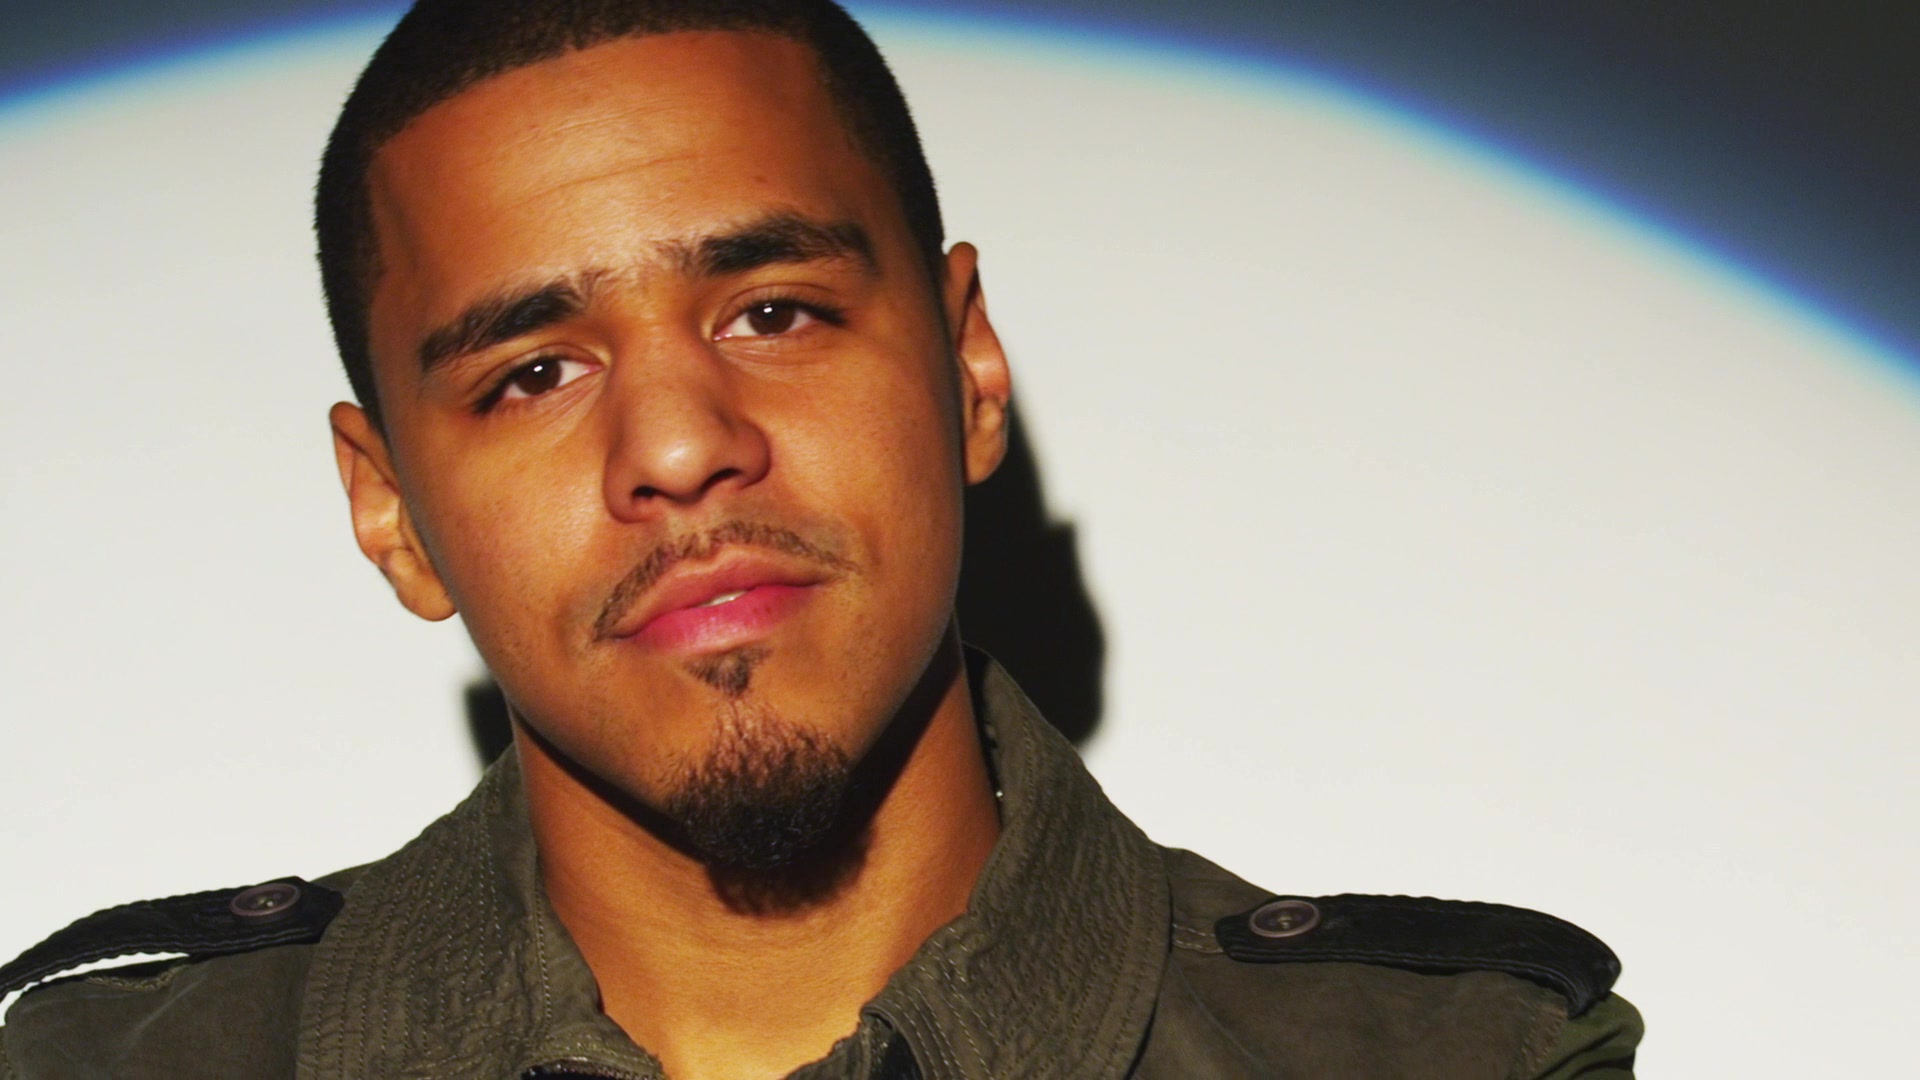 If you've ever wondered who J. Cole's been writing about throughout the years, now you know. Cole proposed to his long-time girlfriend (of 9 years), ...